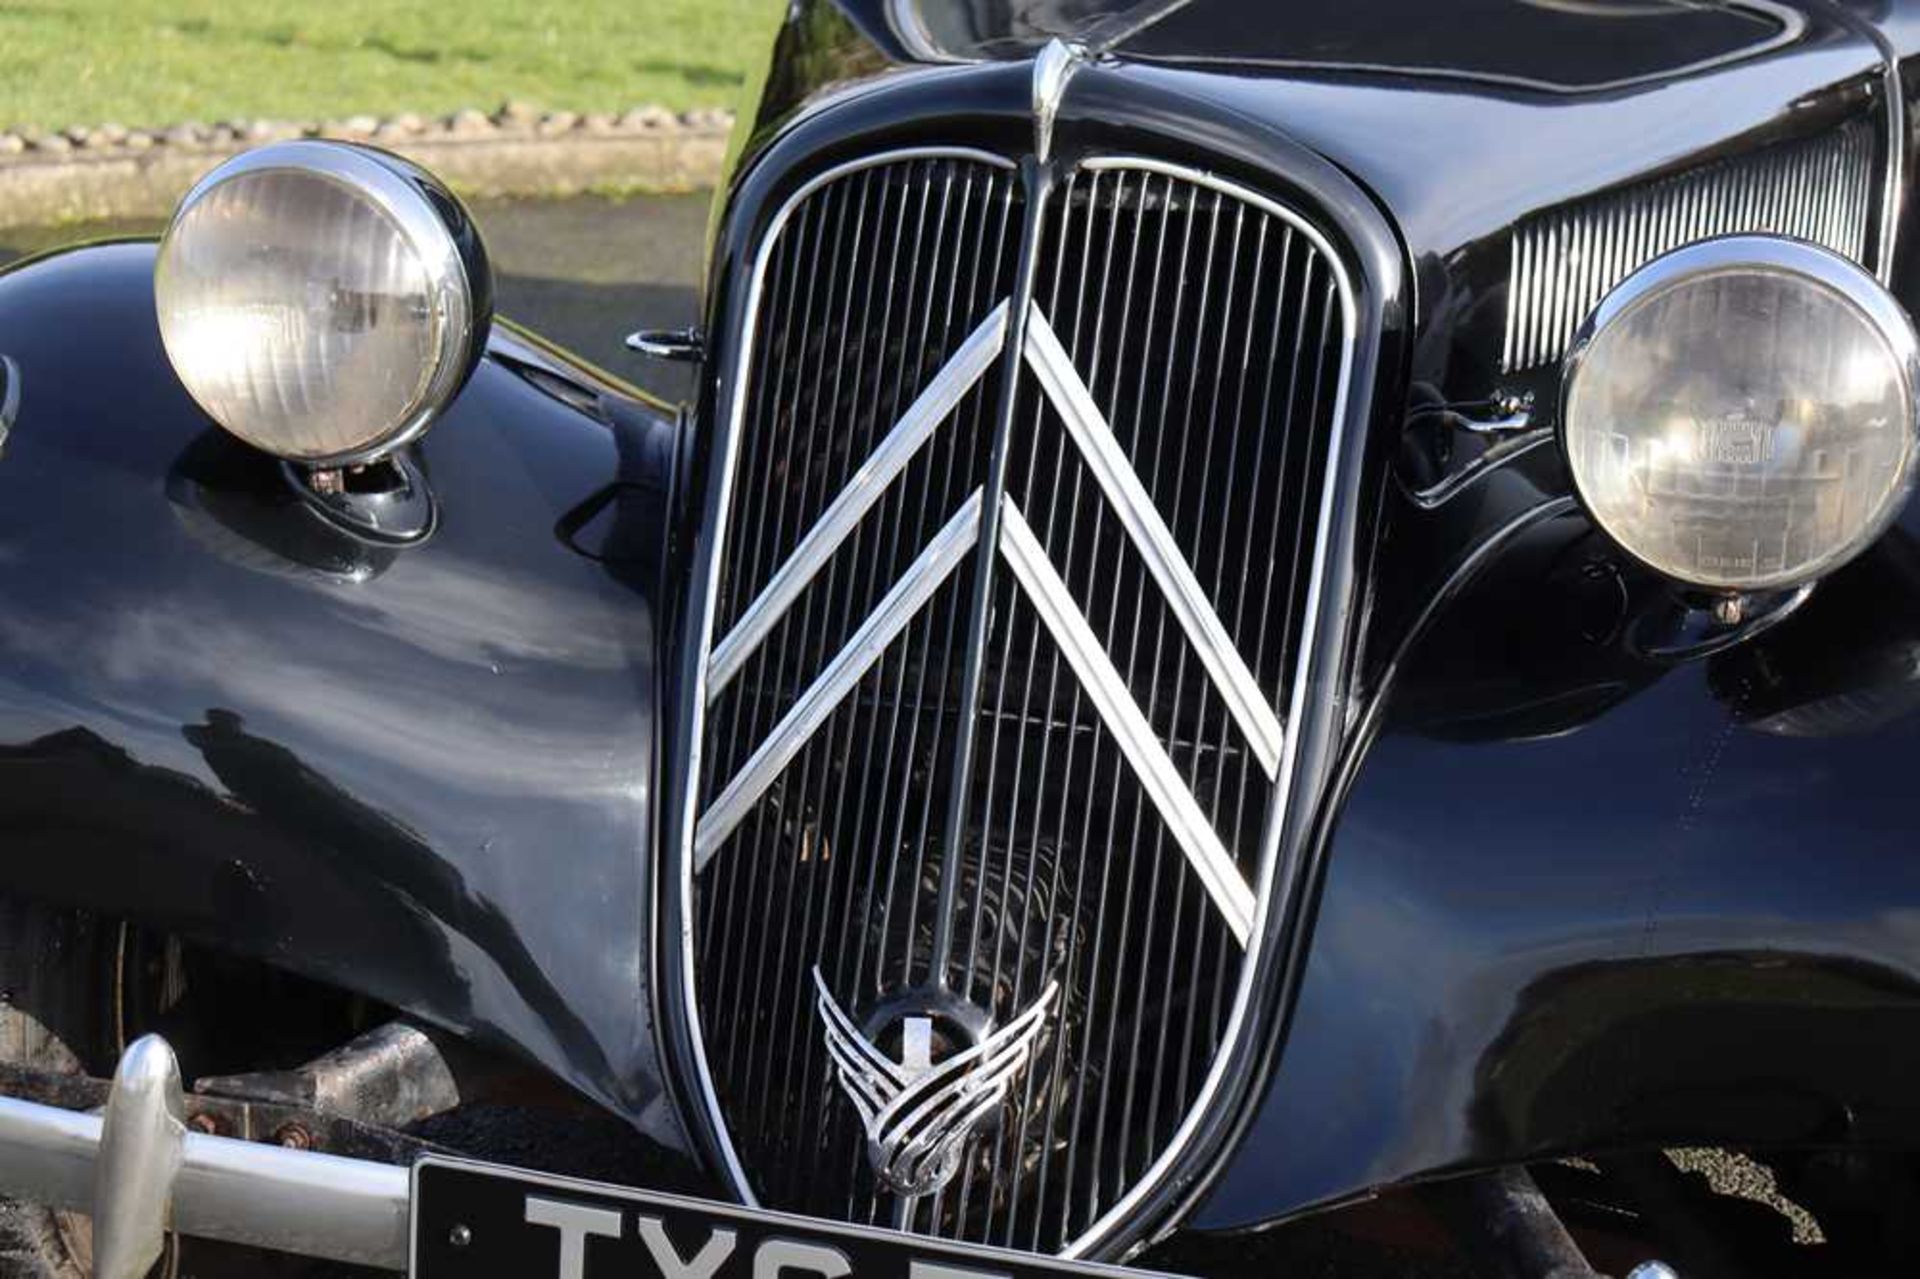 1952 Citroën 11BL Traction Avant In current ownership for over 40 years - Image 20 of 60